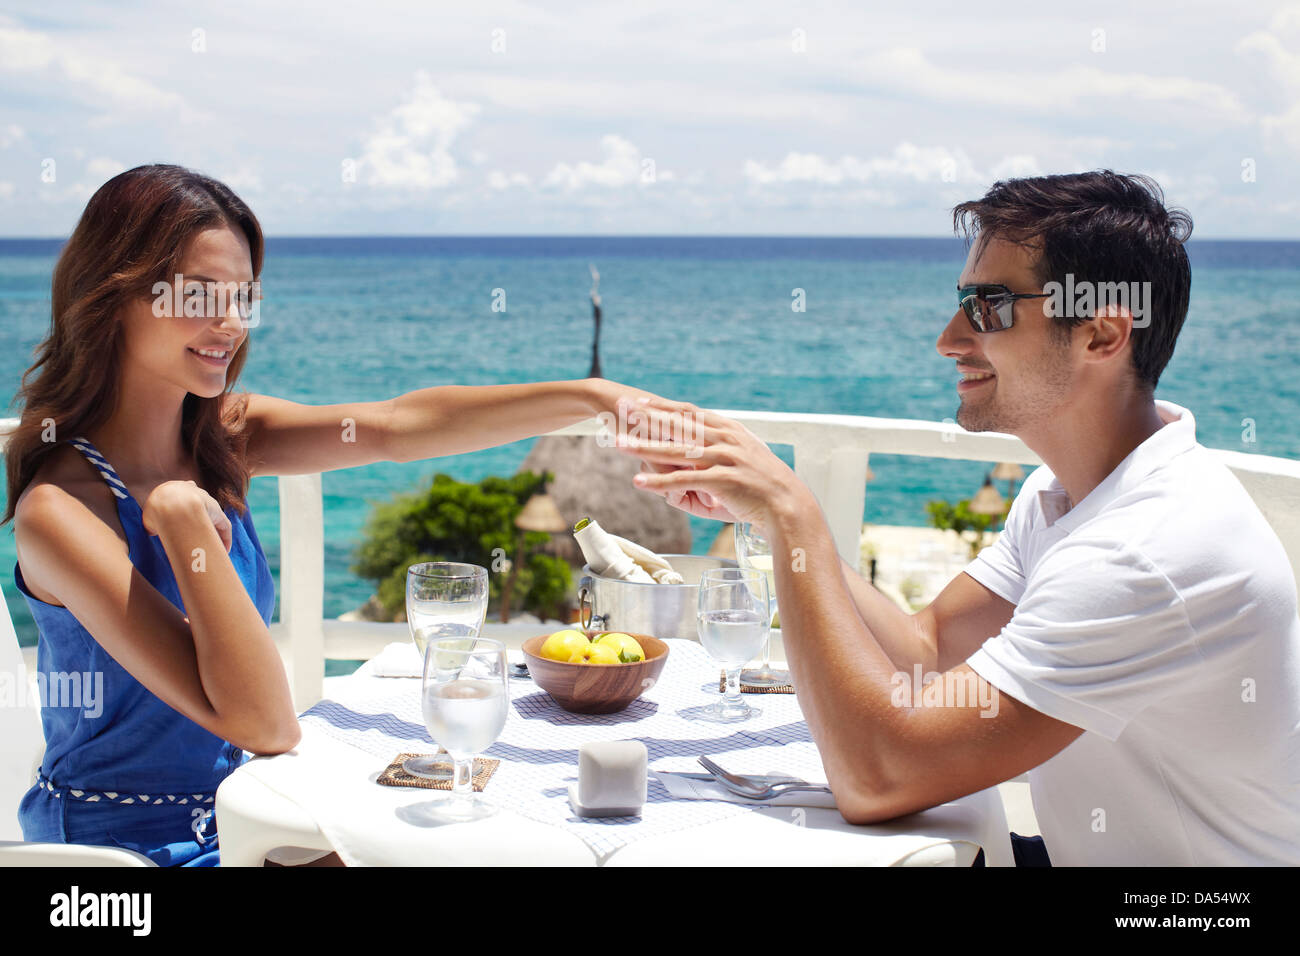 A young couple sitting at a table by the sea. Stock Photo